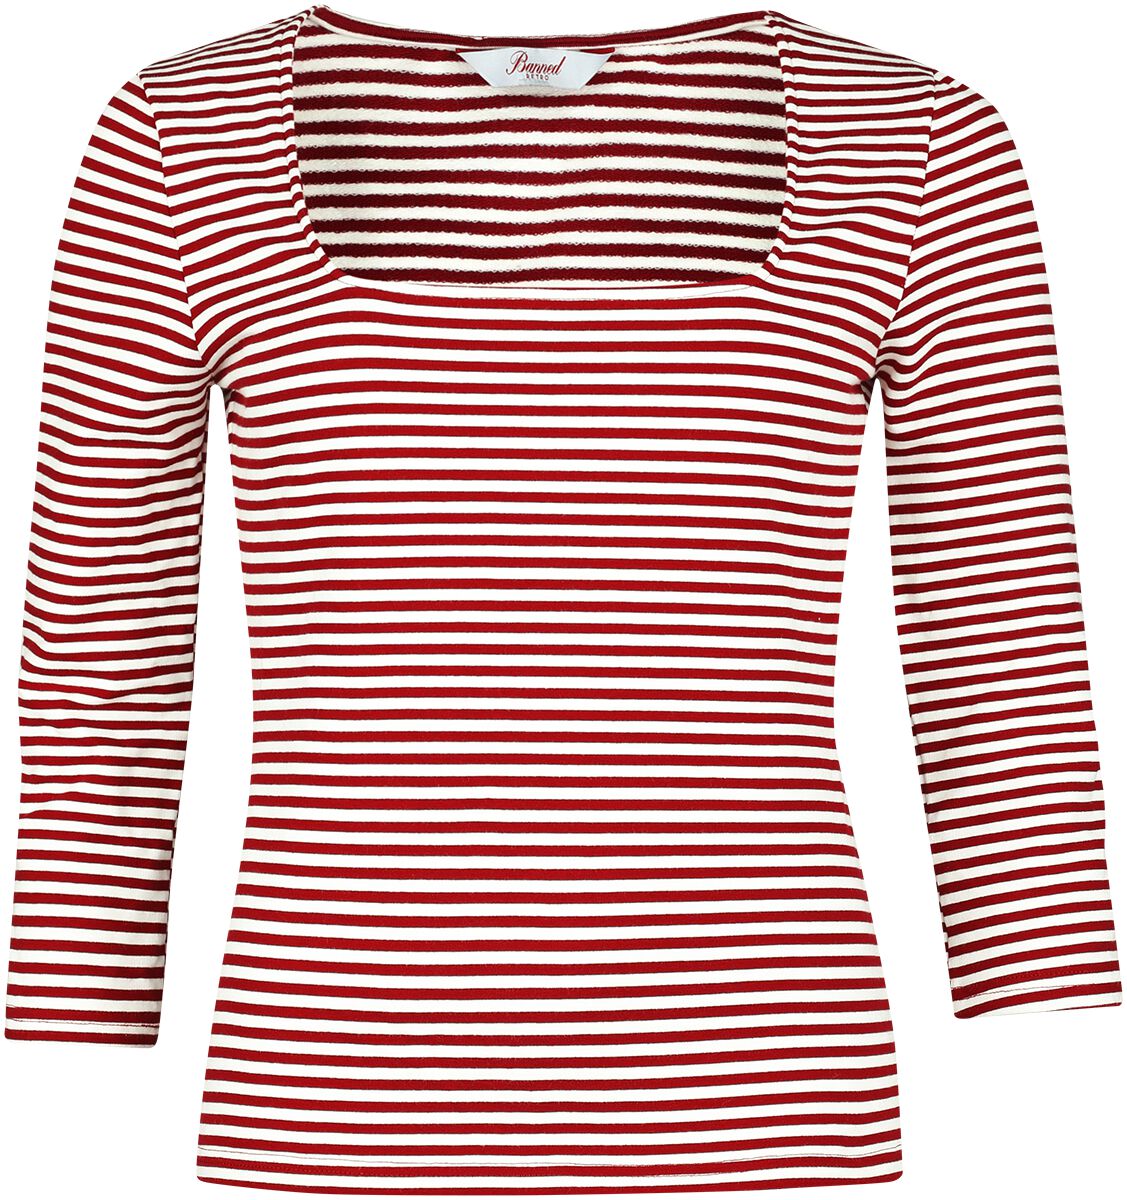 Banned Retro Stripe & Square Top Langarmshirt rot weiß in S